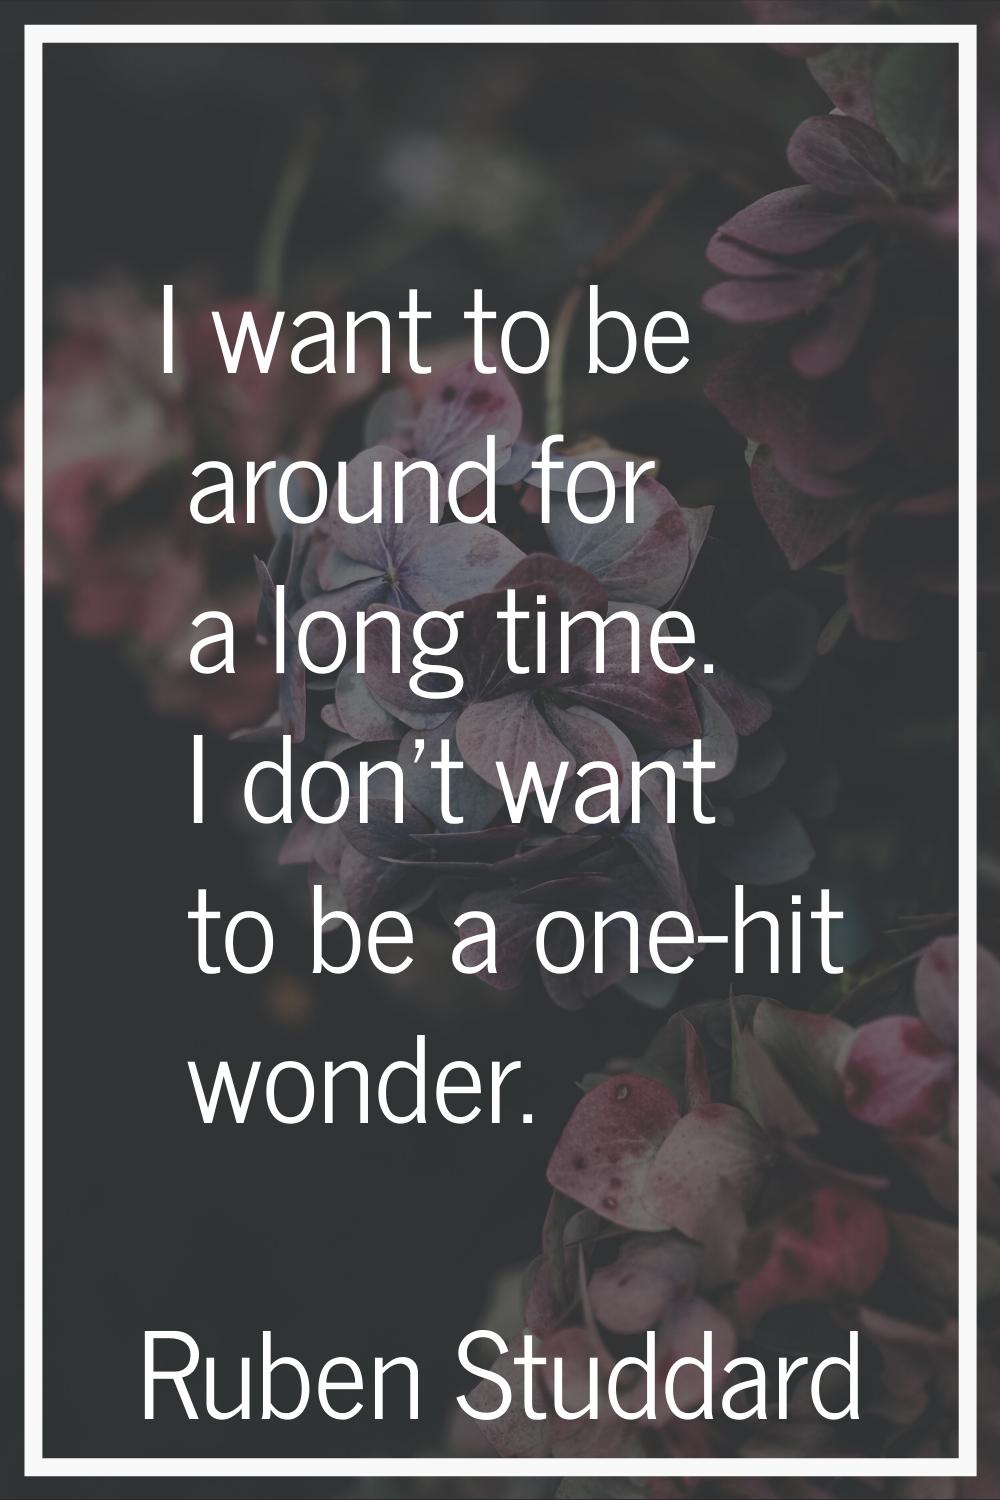 I want to be around for a long time. I don't want to be a one-hit wonder.